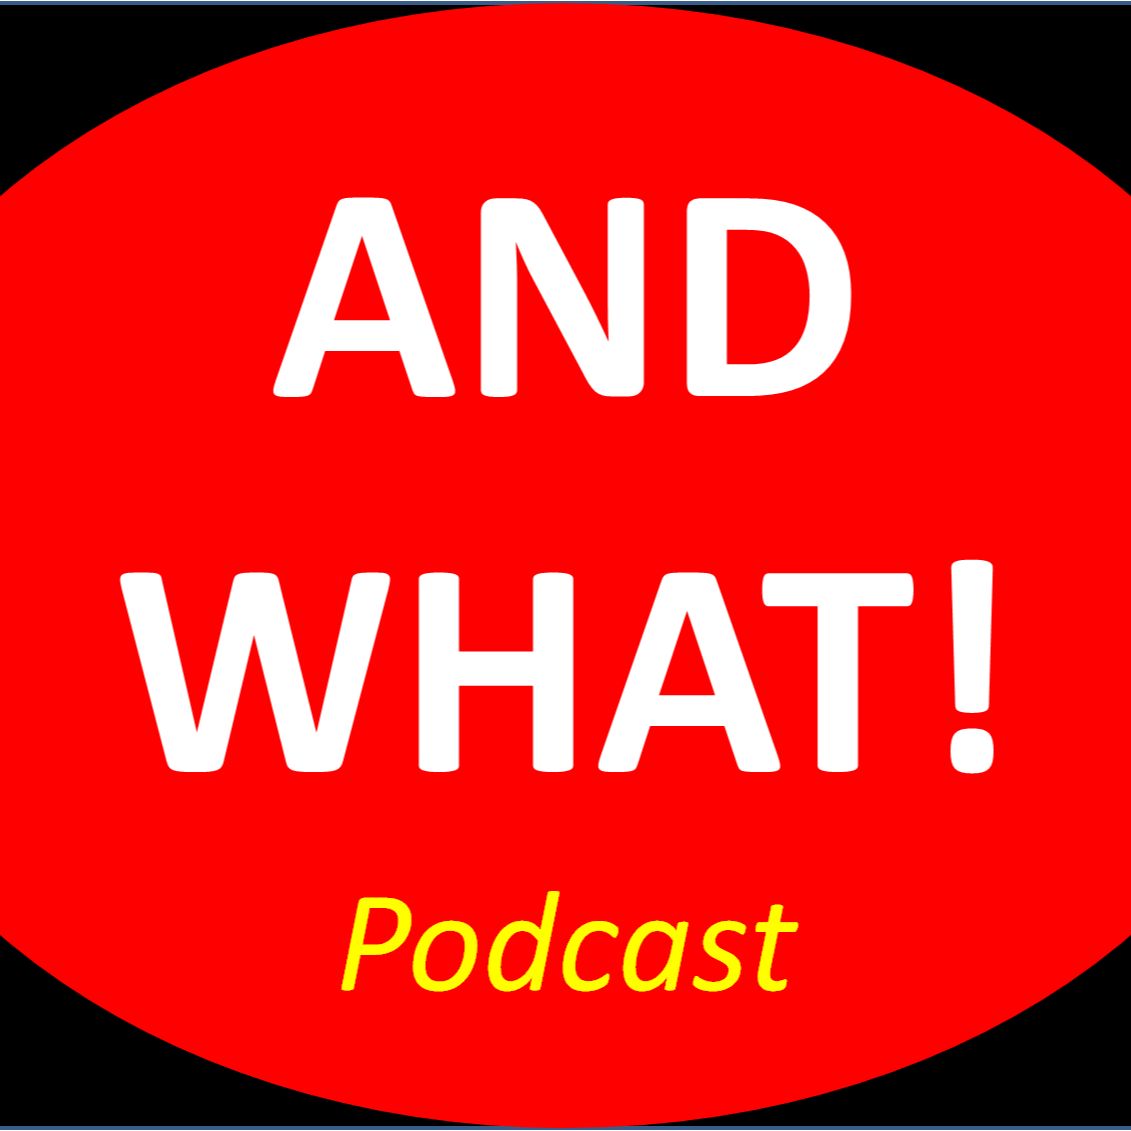 AND WHAT! Podcast